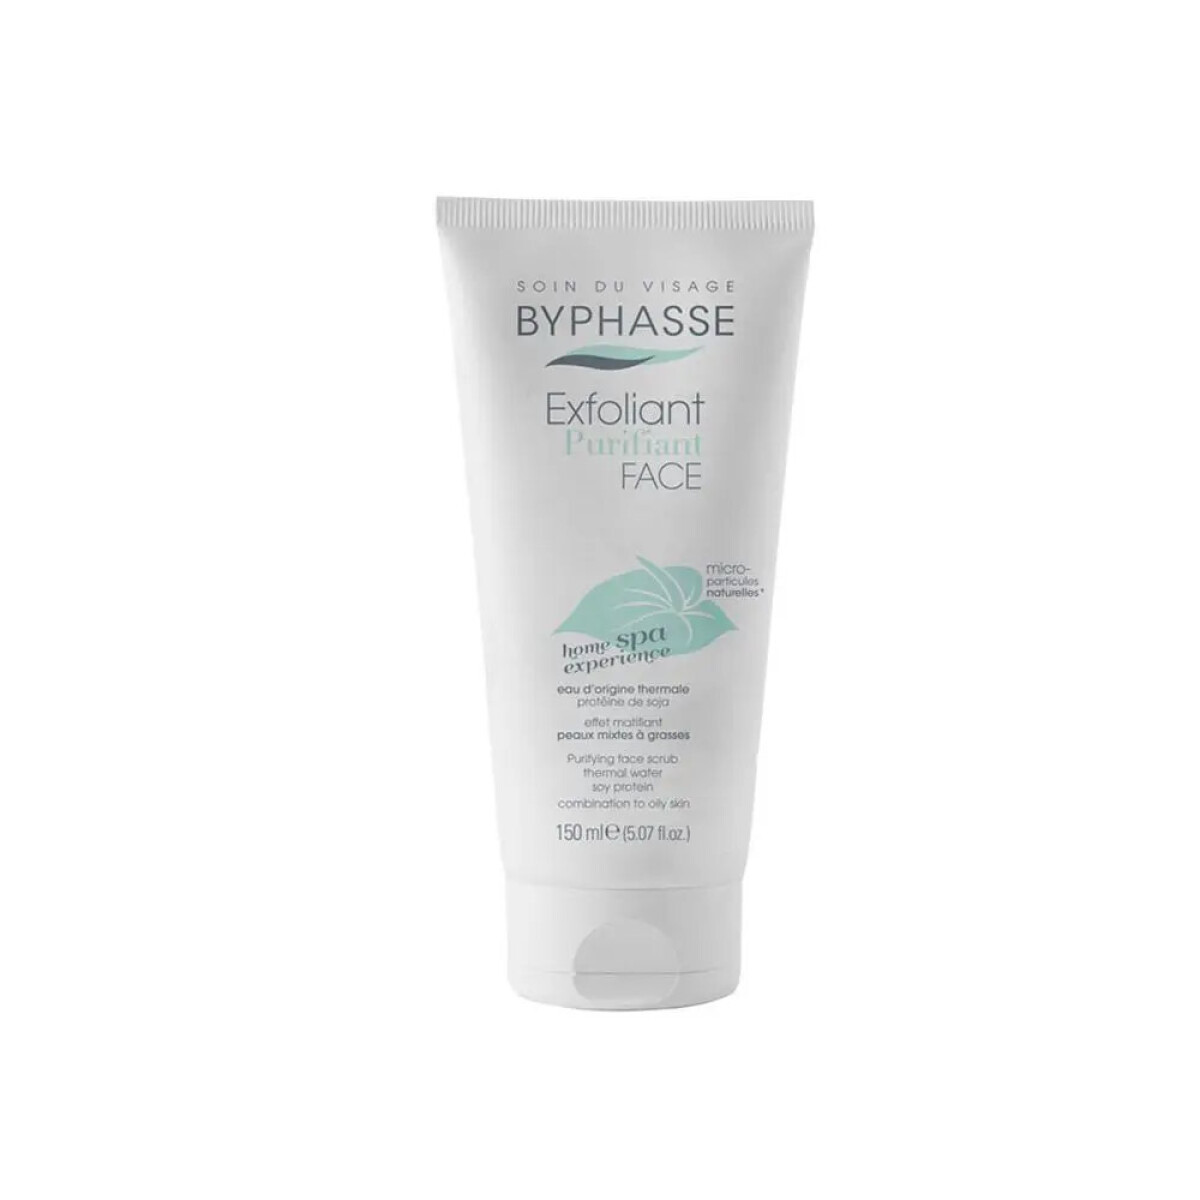 Byphasse Exfoliant Home Spa Experience 